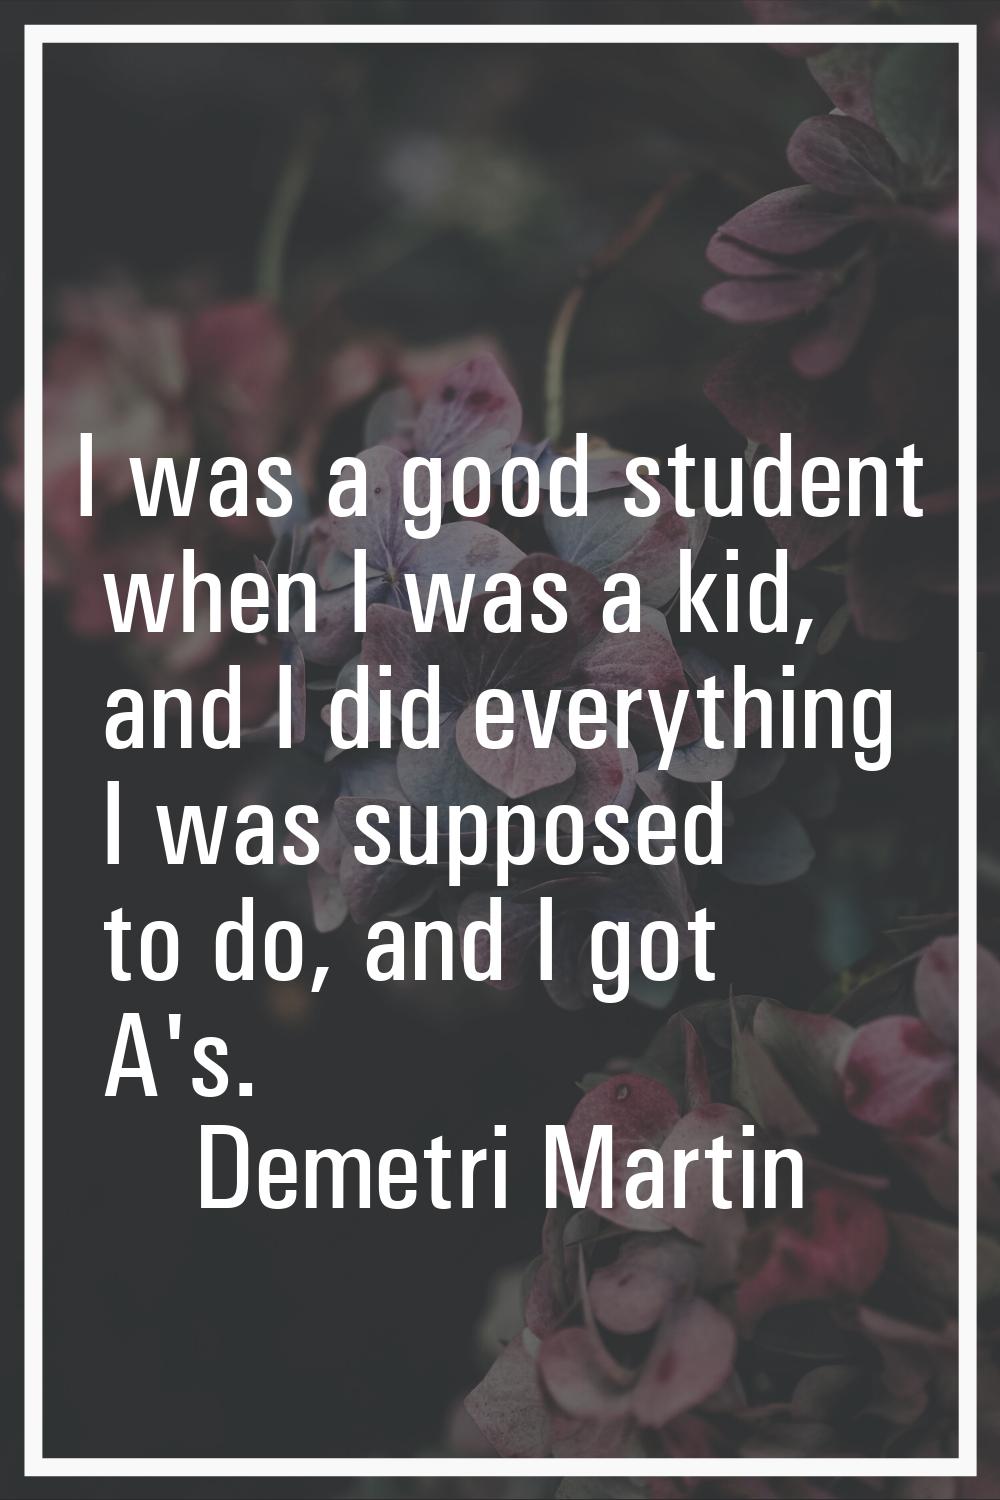 I was a good student when I was a kid, and I did everything I was supposed to do, and I got A's.